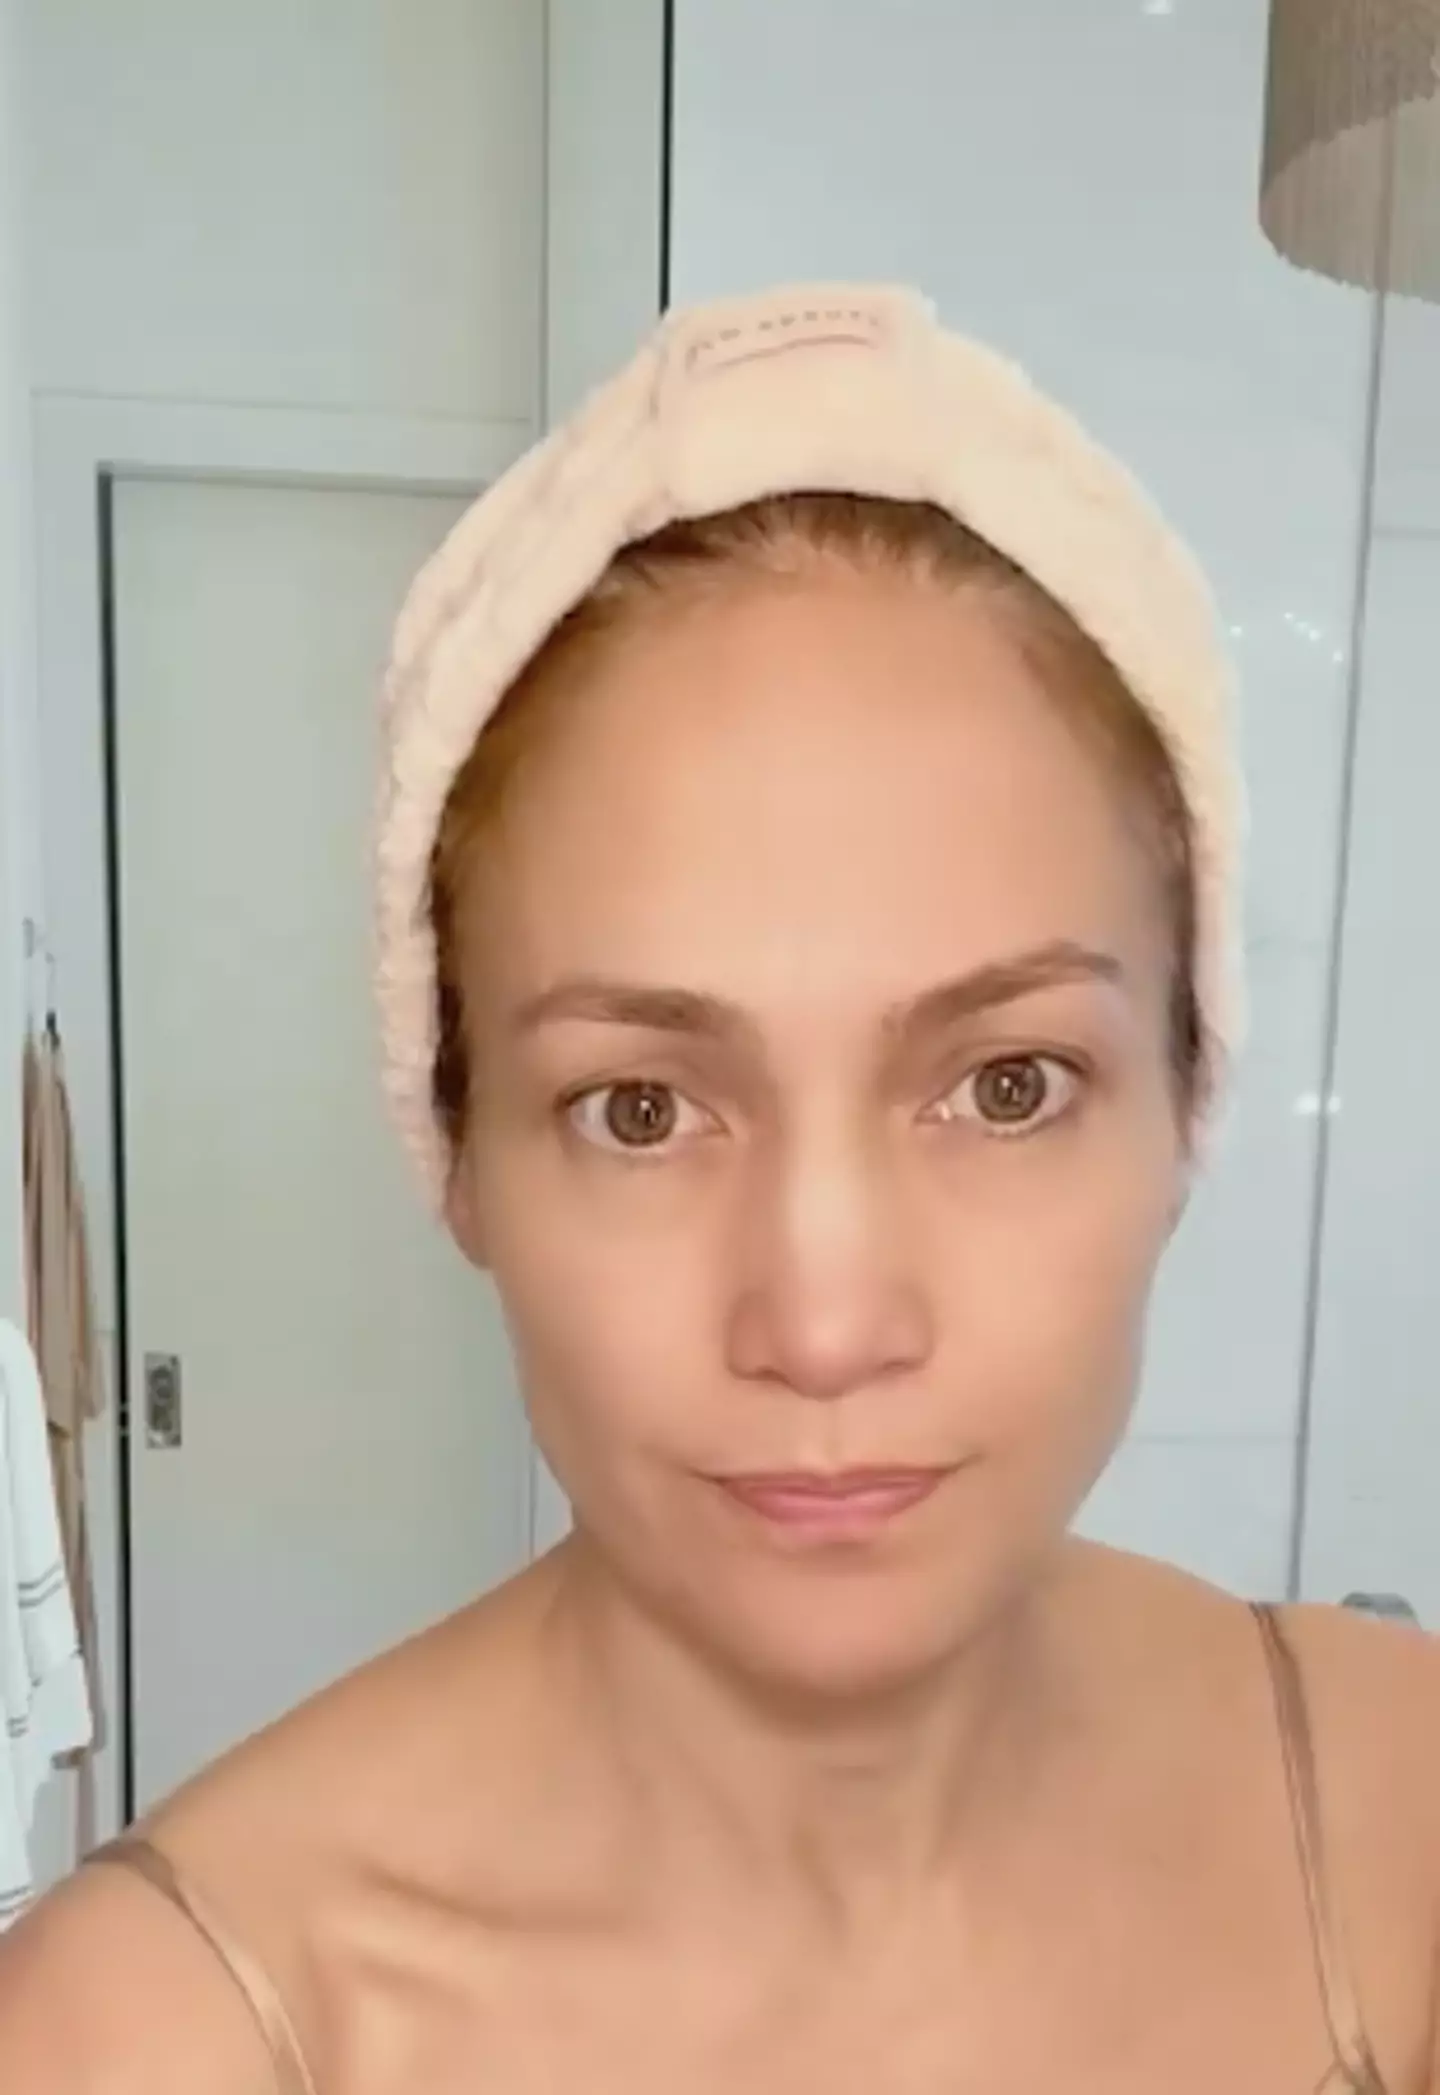 She shared her skincare step by step.